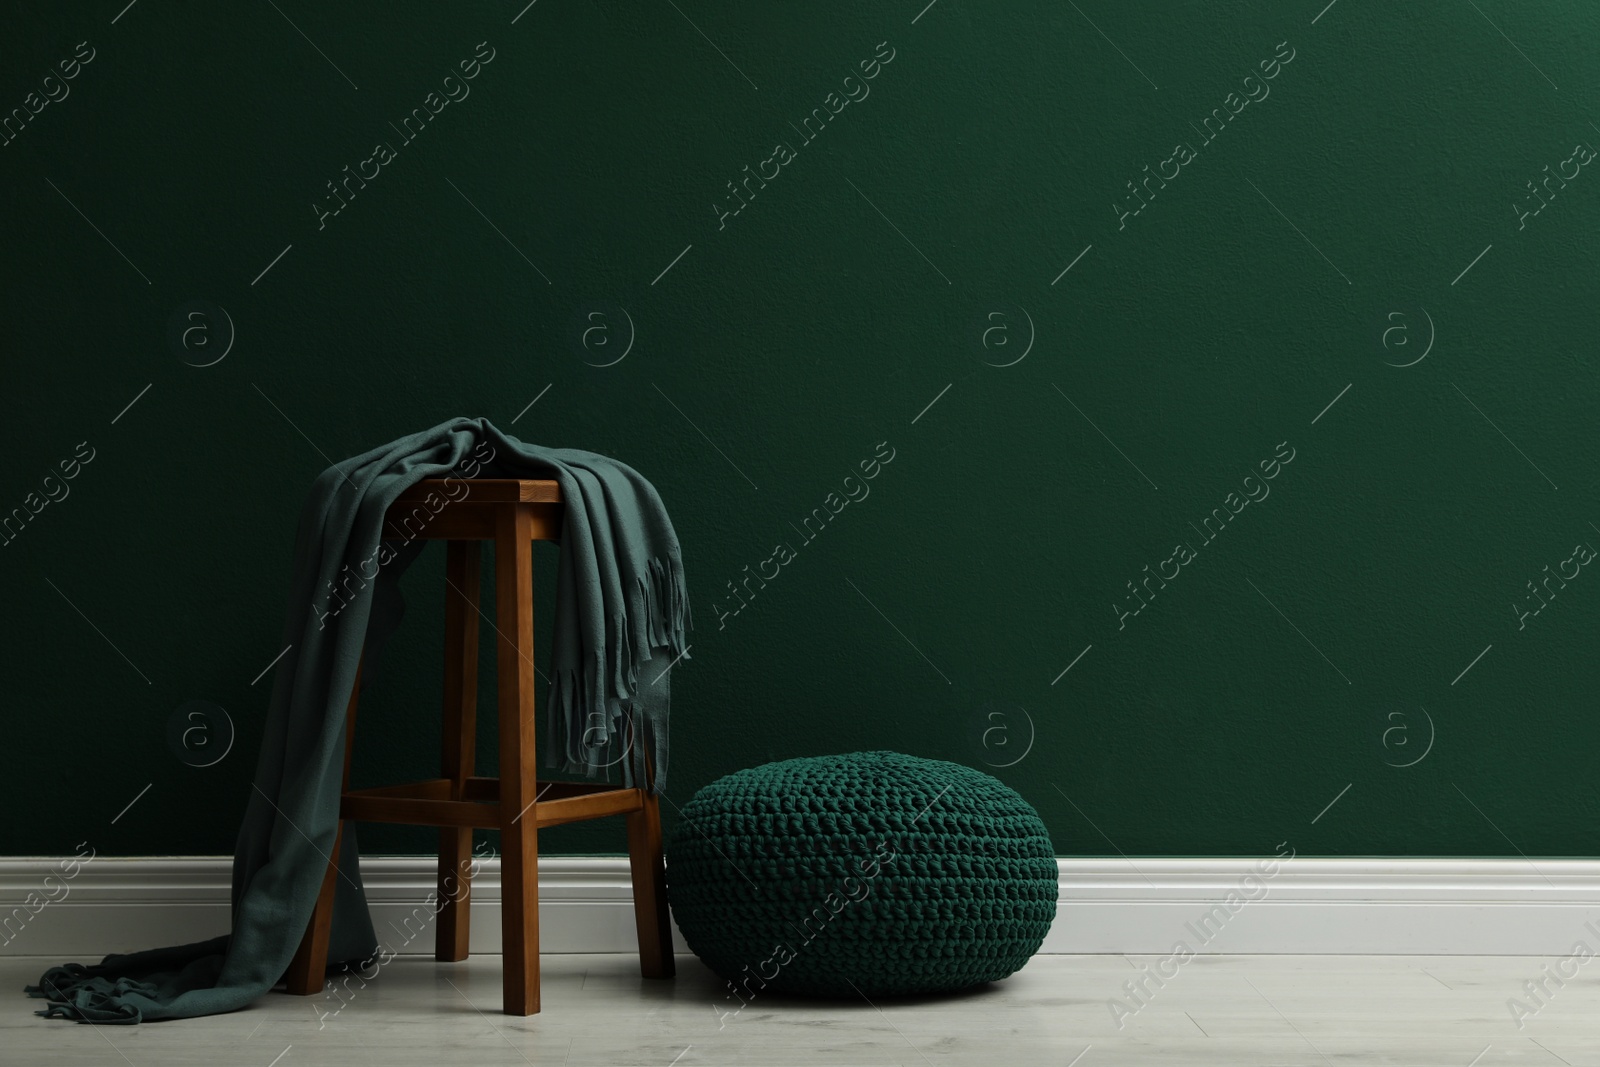 Photo of Stylish knitted pouf and wooden stool with blanket near green wall indoors, space for text